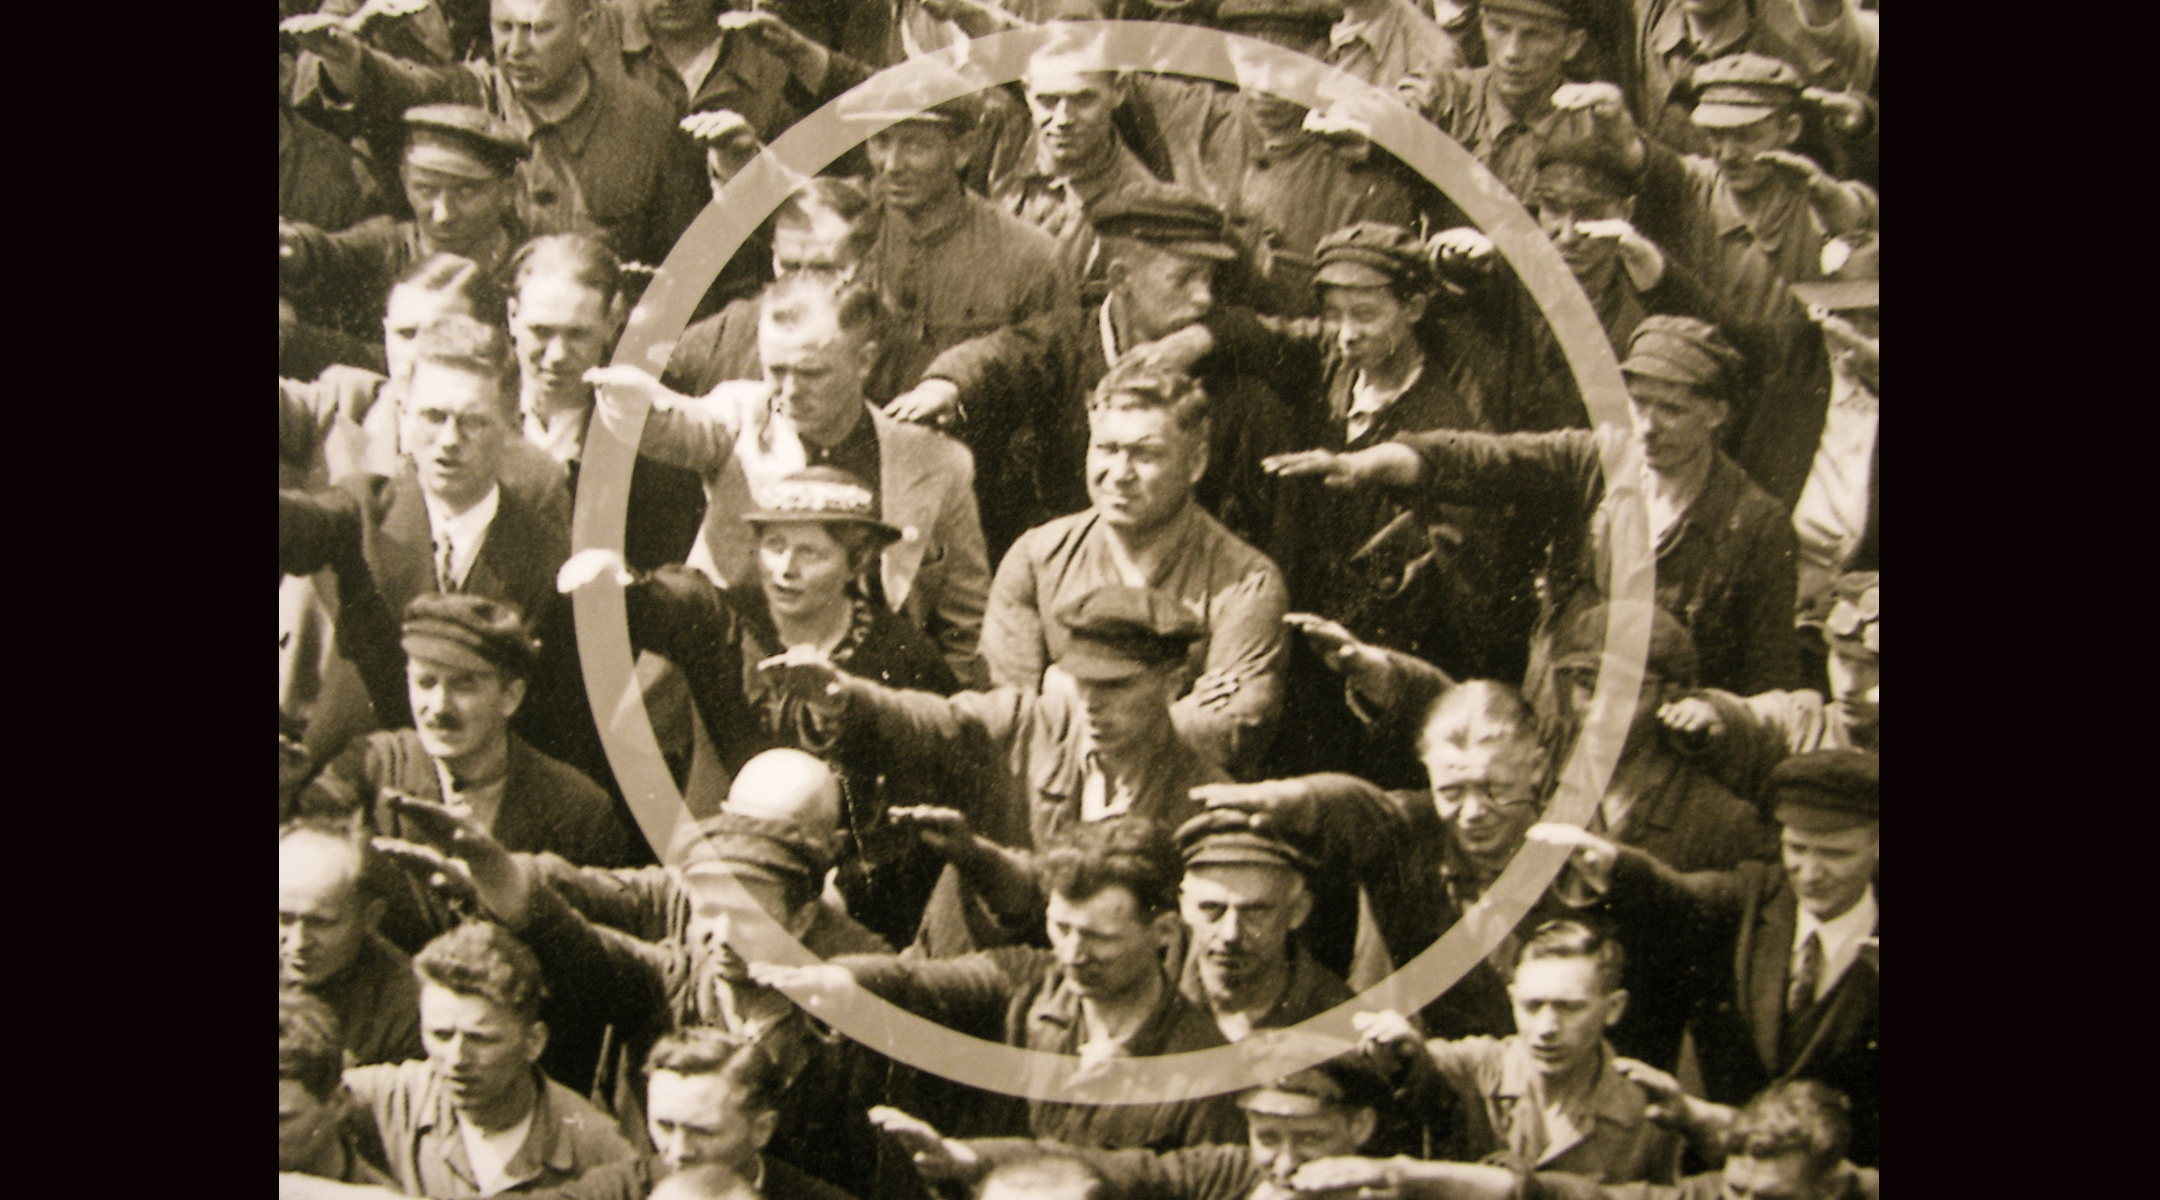 A photo of German ship workers giving a "Heil Hitler" salute in 1936, with one man standing with his arms folded, circled in the middle.